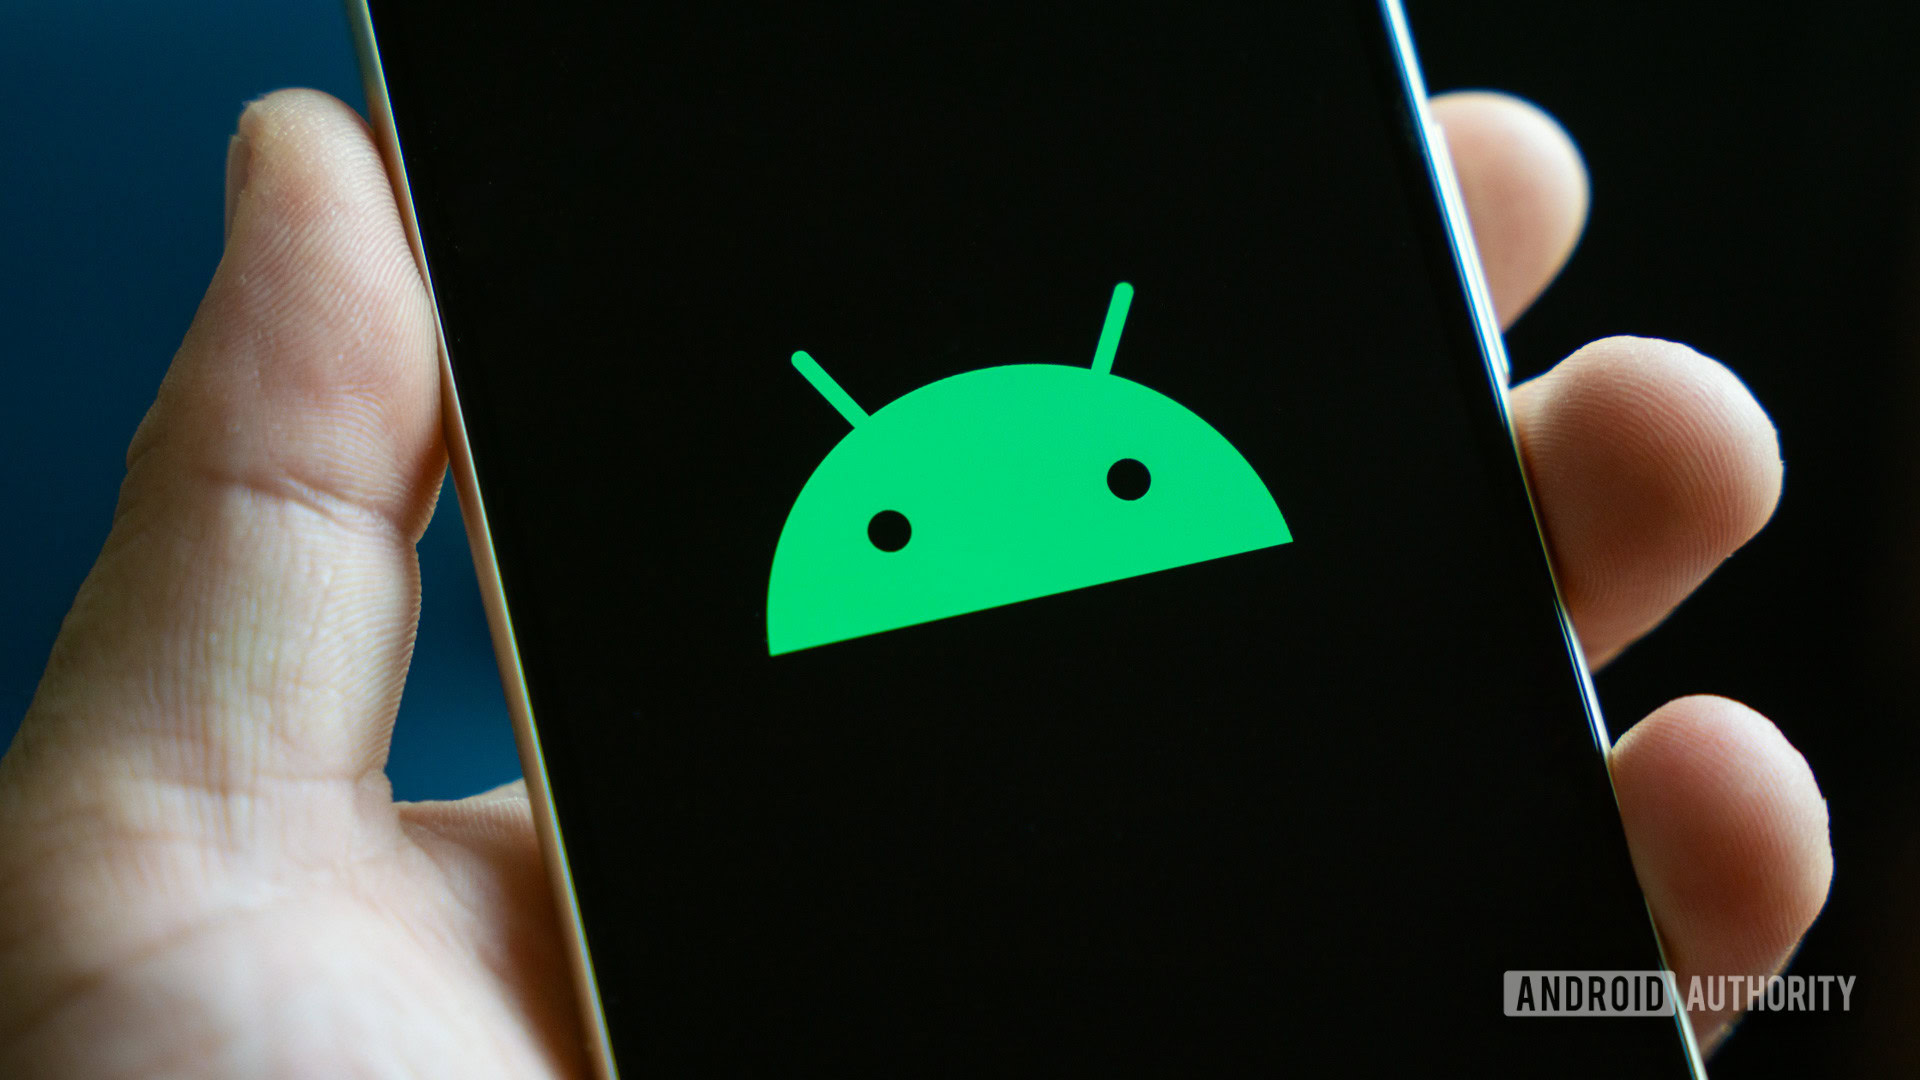 Android logo on smartphone stock photo (8)